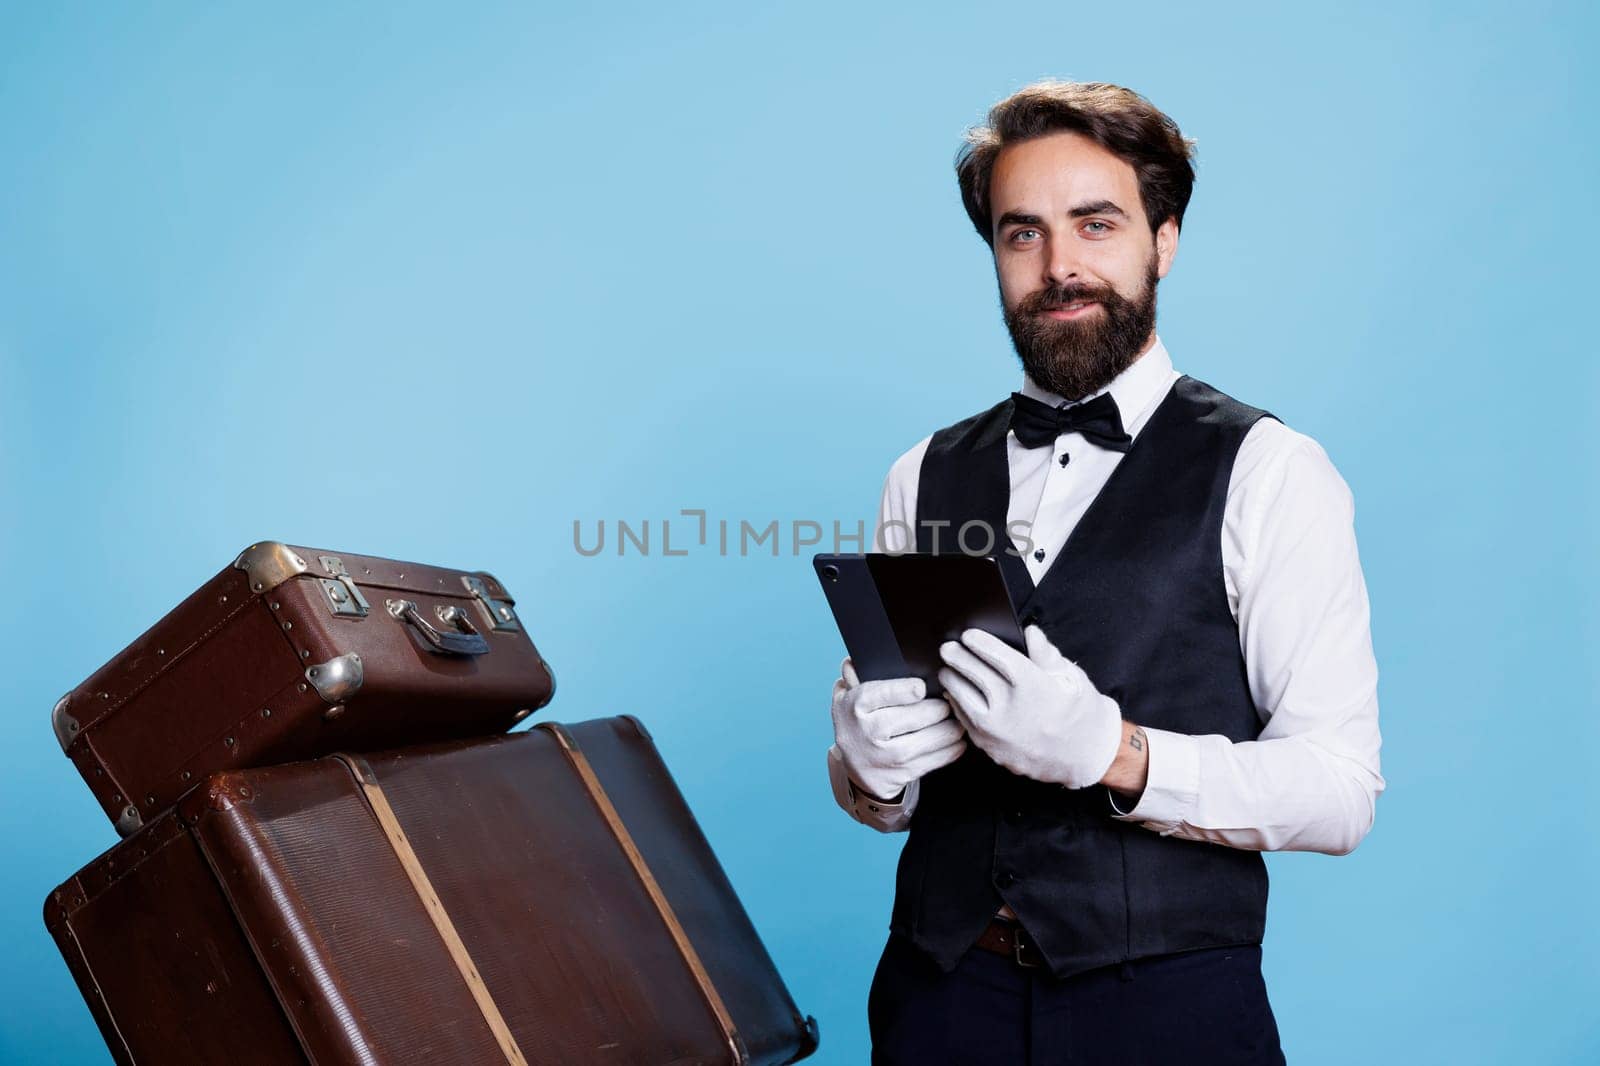 Hotel concierge checks online reservations on gadget, standing next to suitcases for safekeeping. Bellhop showcases his commitment in providing excellent services, important role.